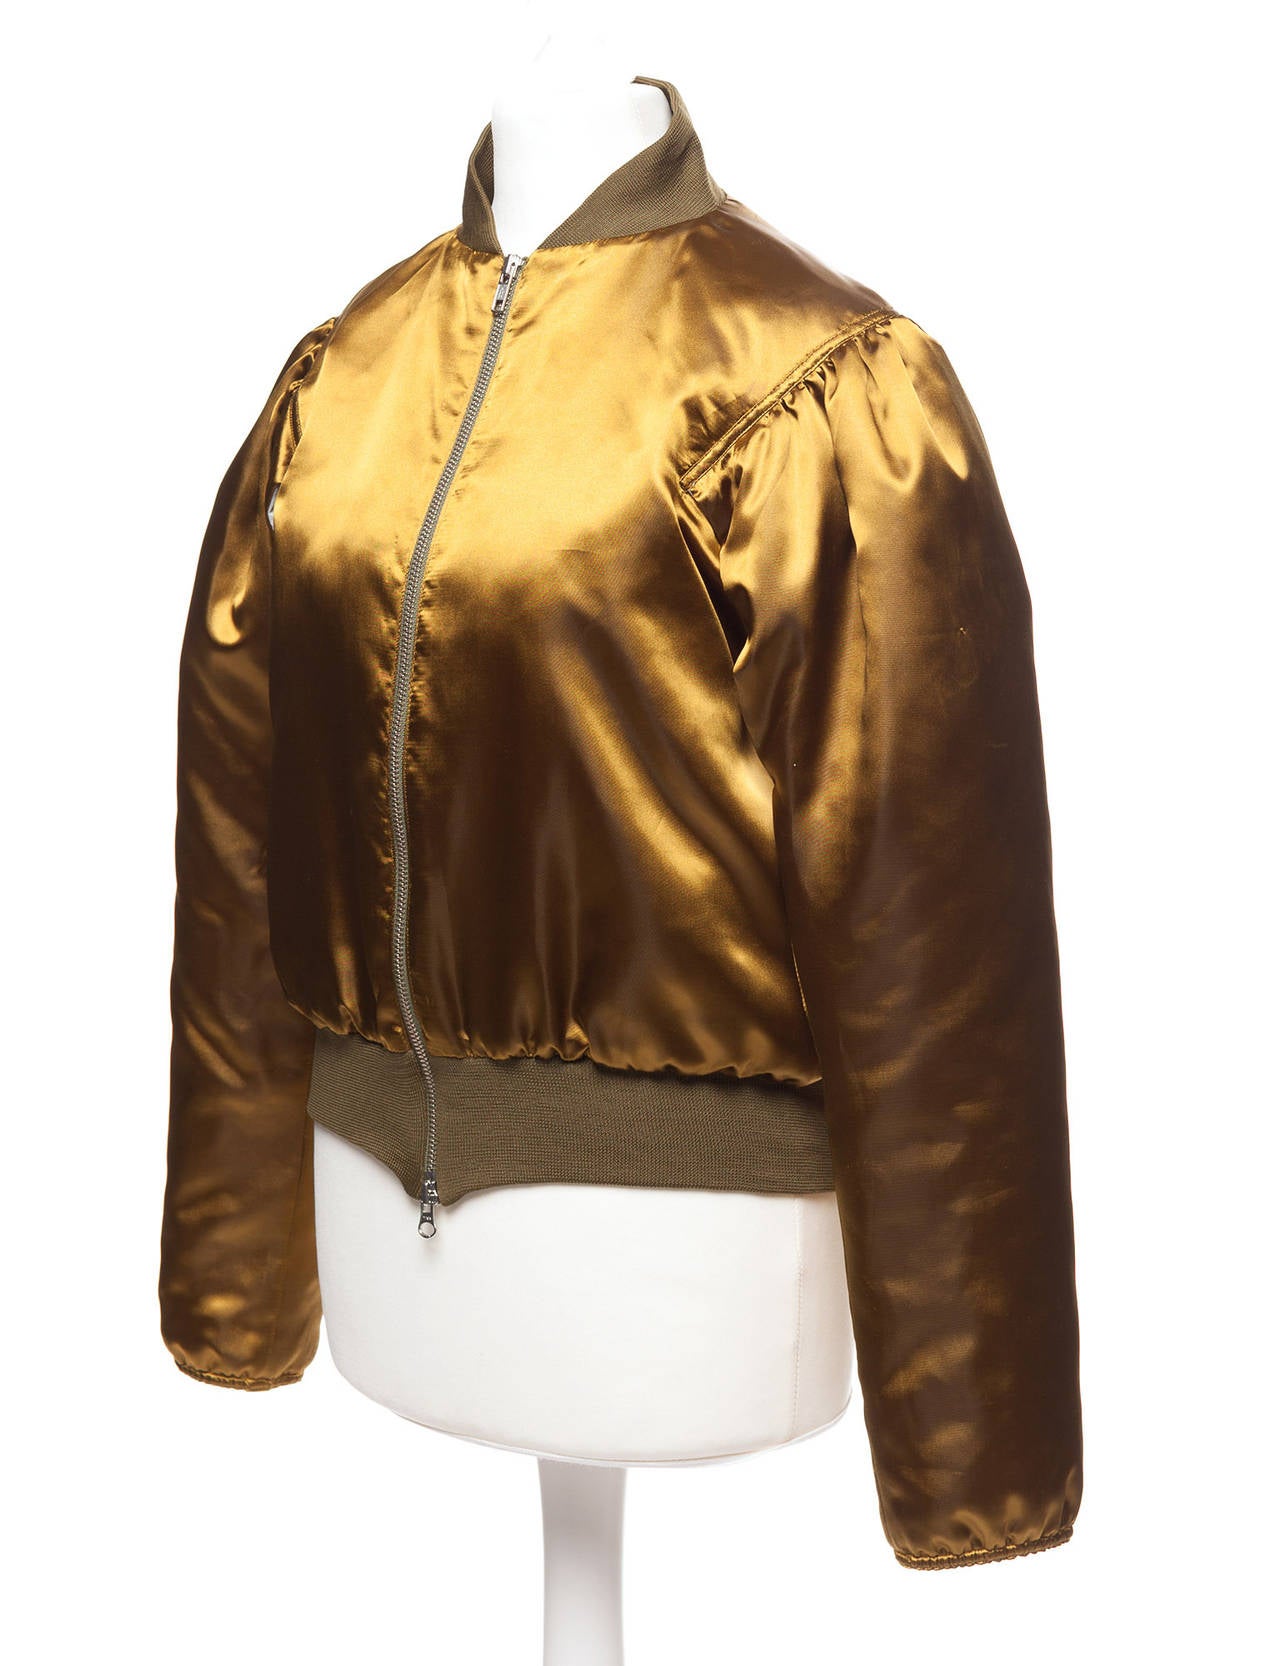 Yohji Yamamoto Vintage Gold Bomber in shiny mustard satin. Bomber has ribbed collar , sleeves and bottom hem detail, 2 way zipper in silver and sheared in sleeves with opening at underarm, snug fit, and off white quiltted linning. Pure romanticism